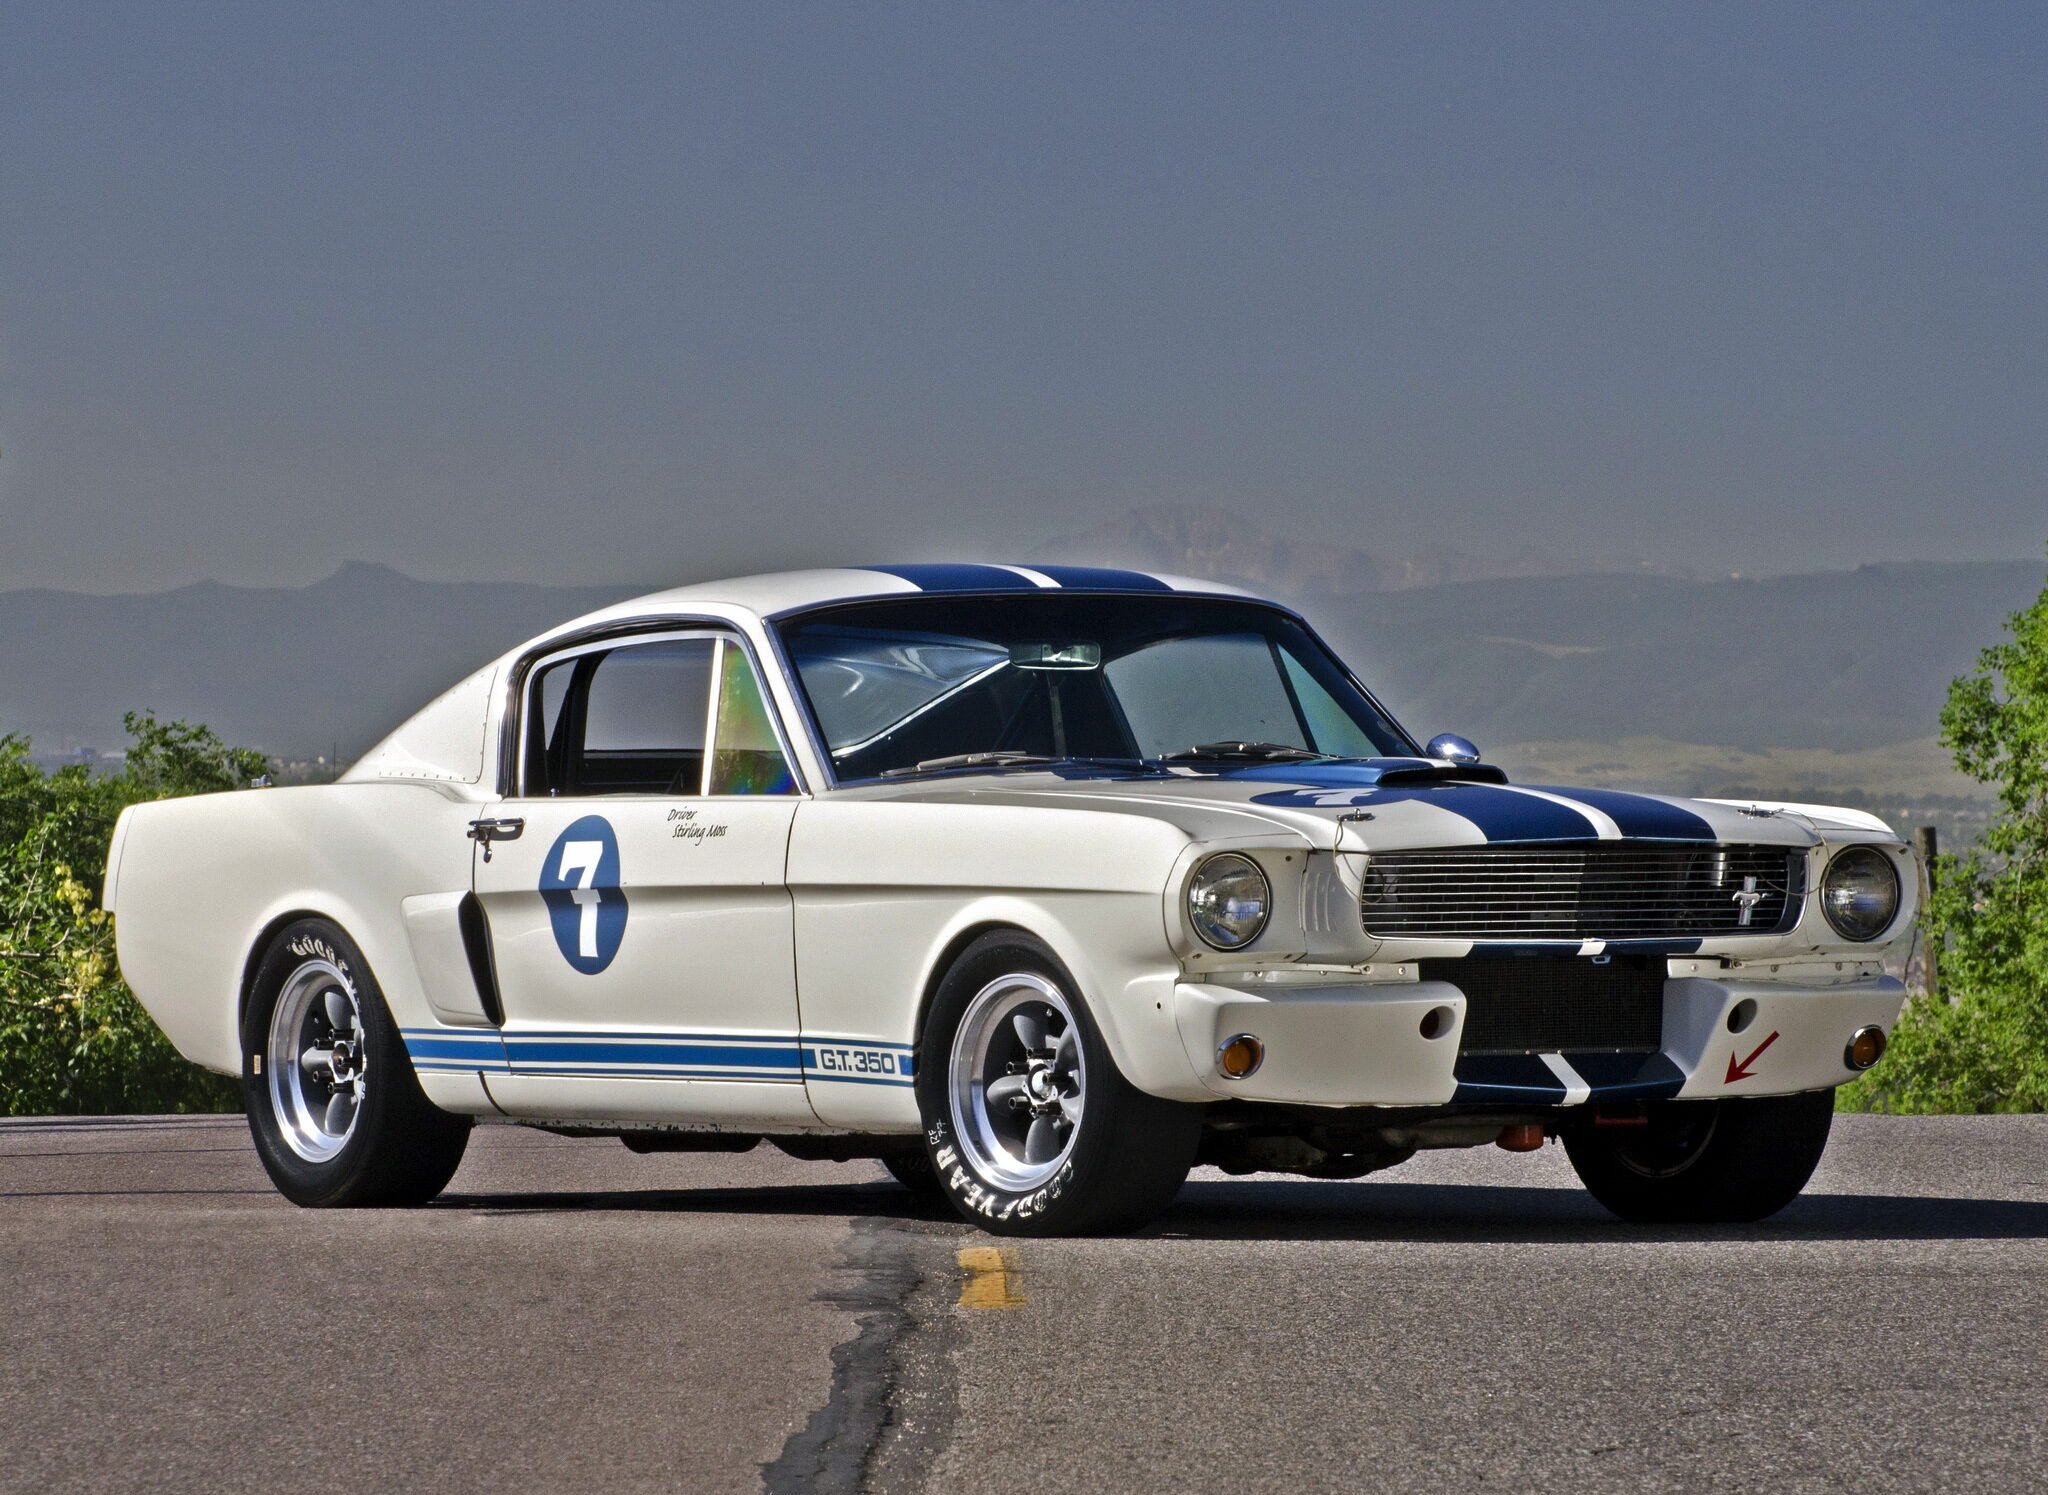 2016 Ford Mustang Shelby GT350R Photo Gallery | Cars.com